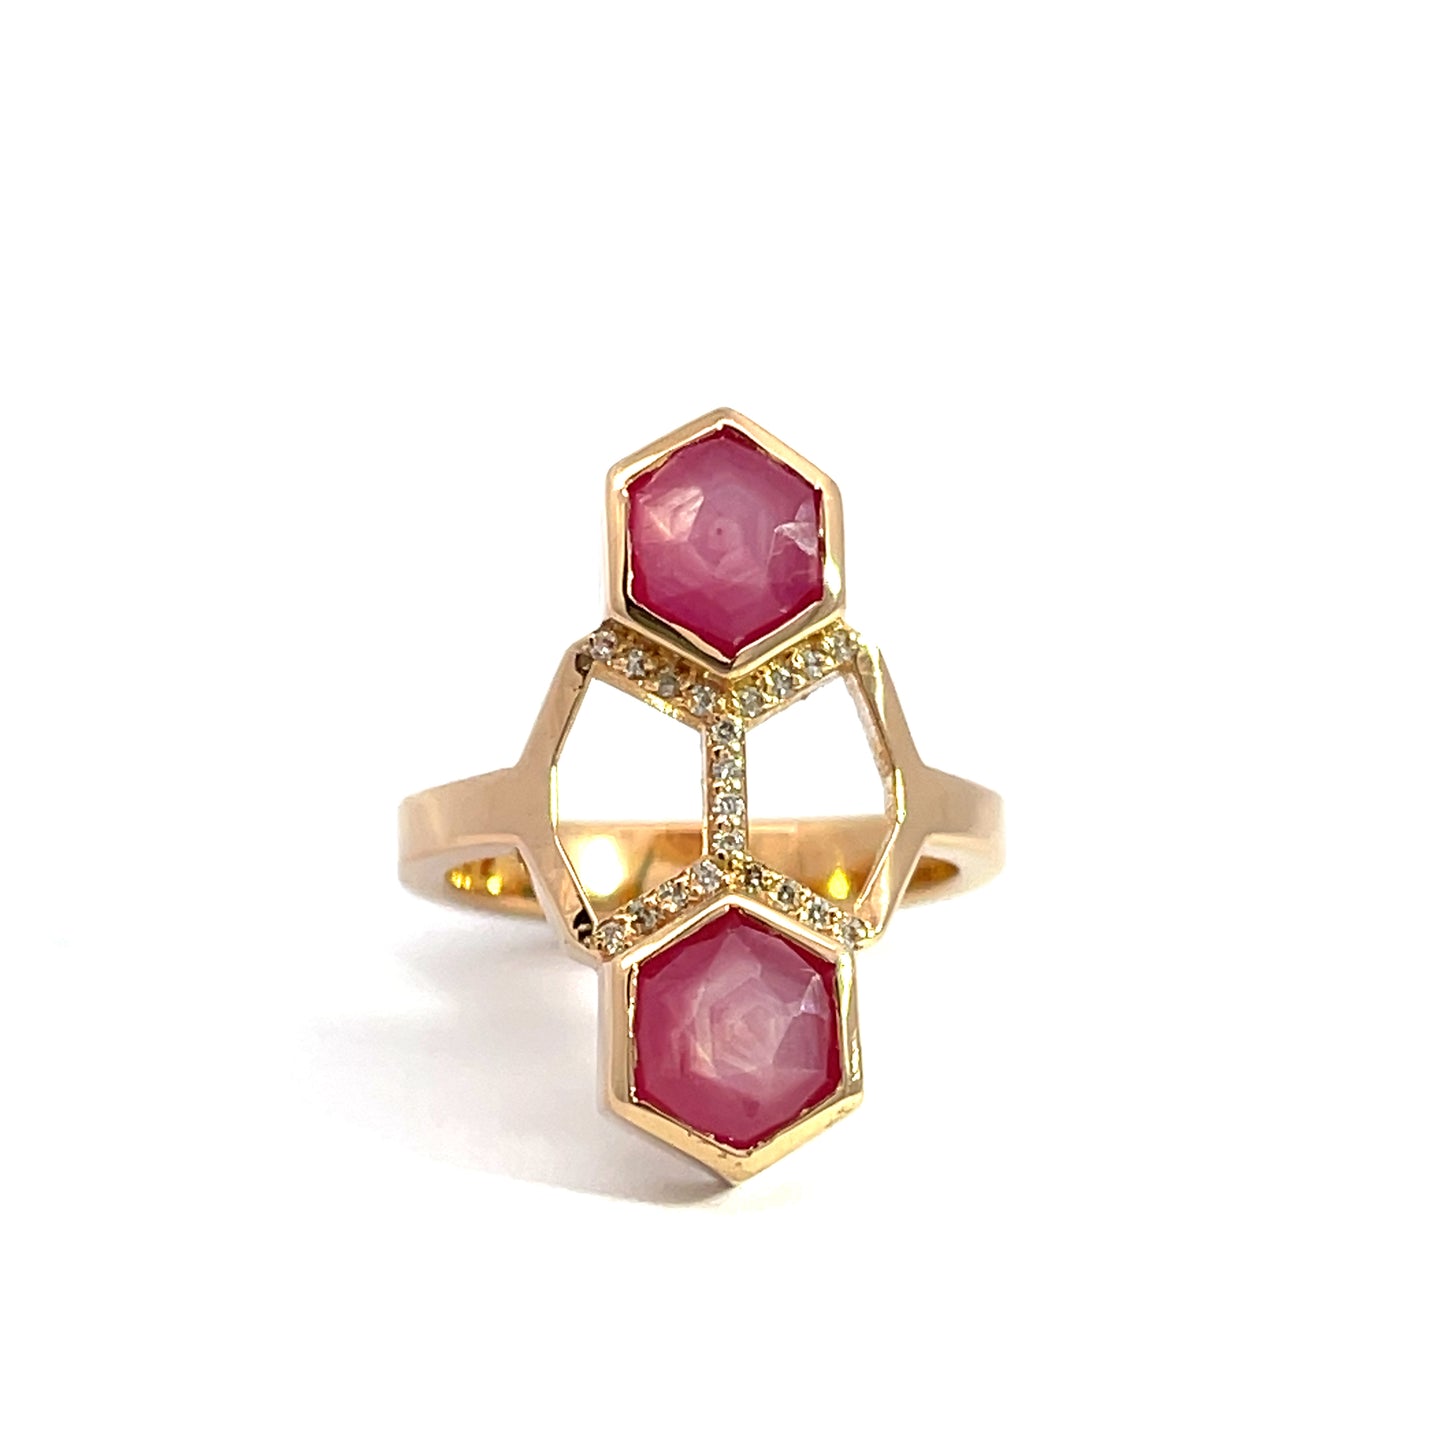 Double Hexagon Pink Sapphire Ring